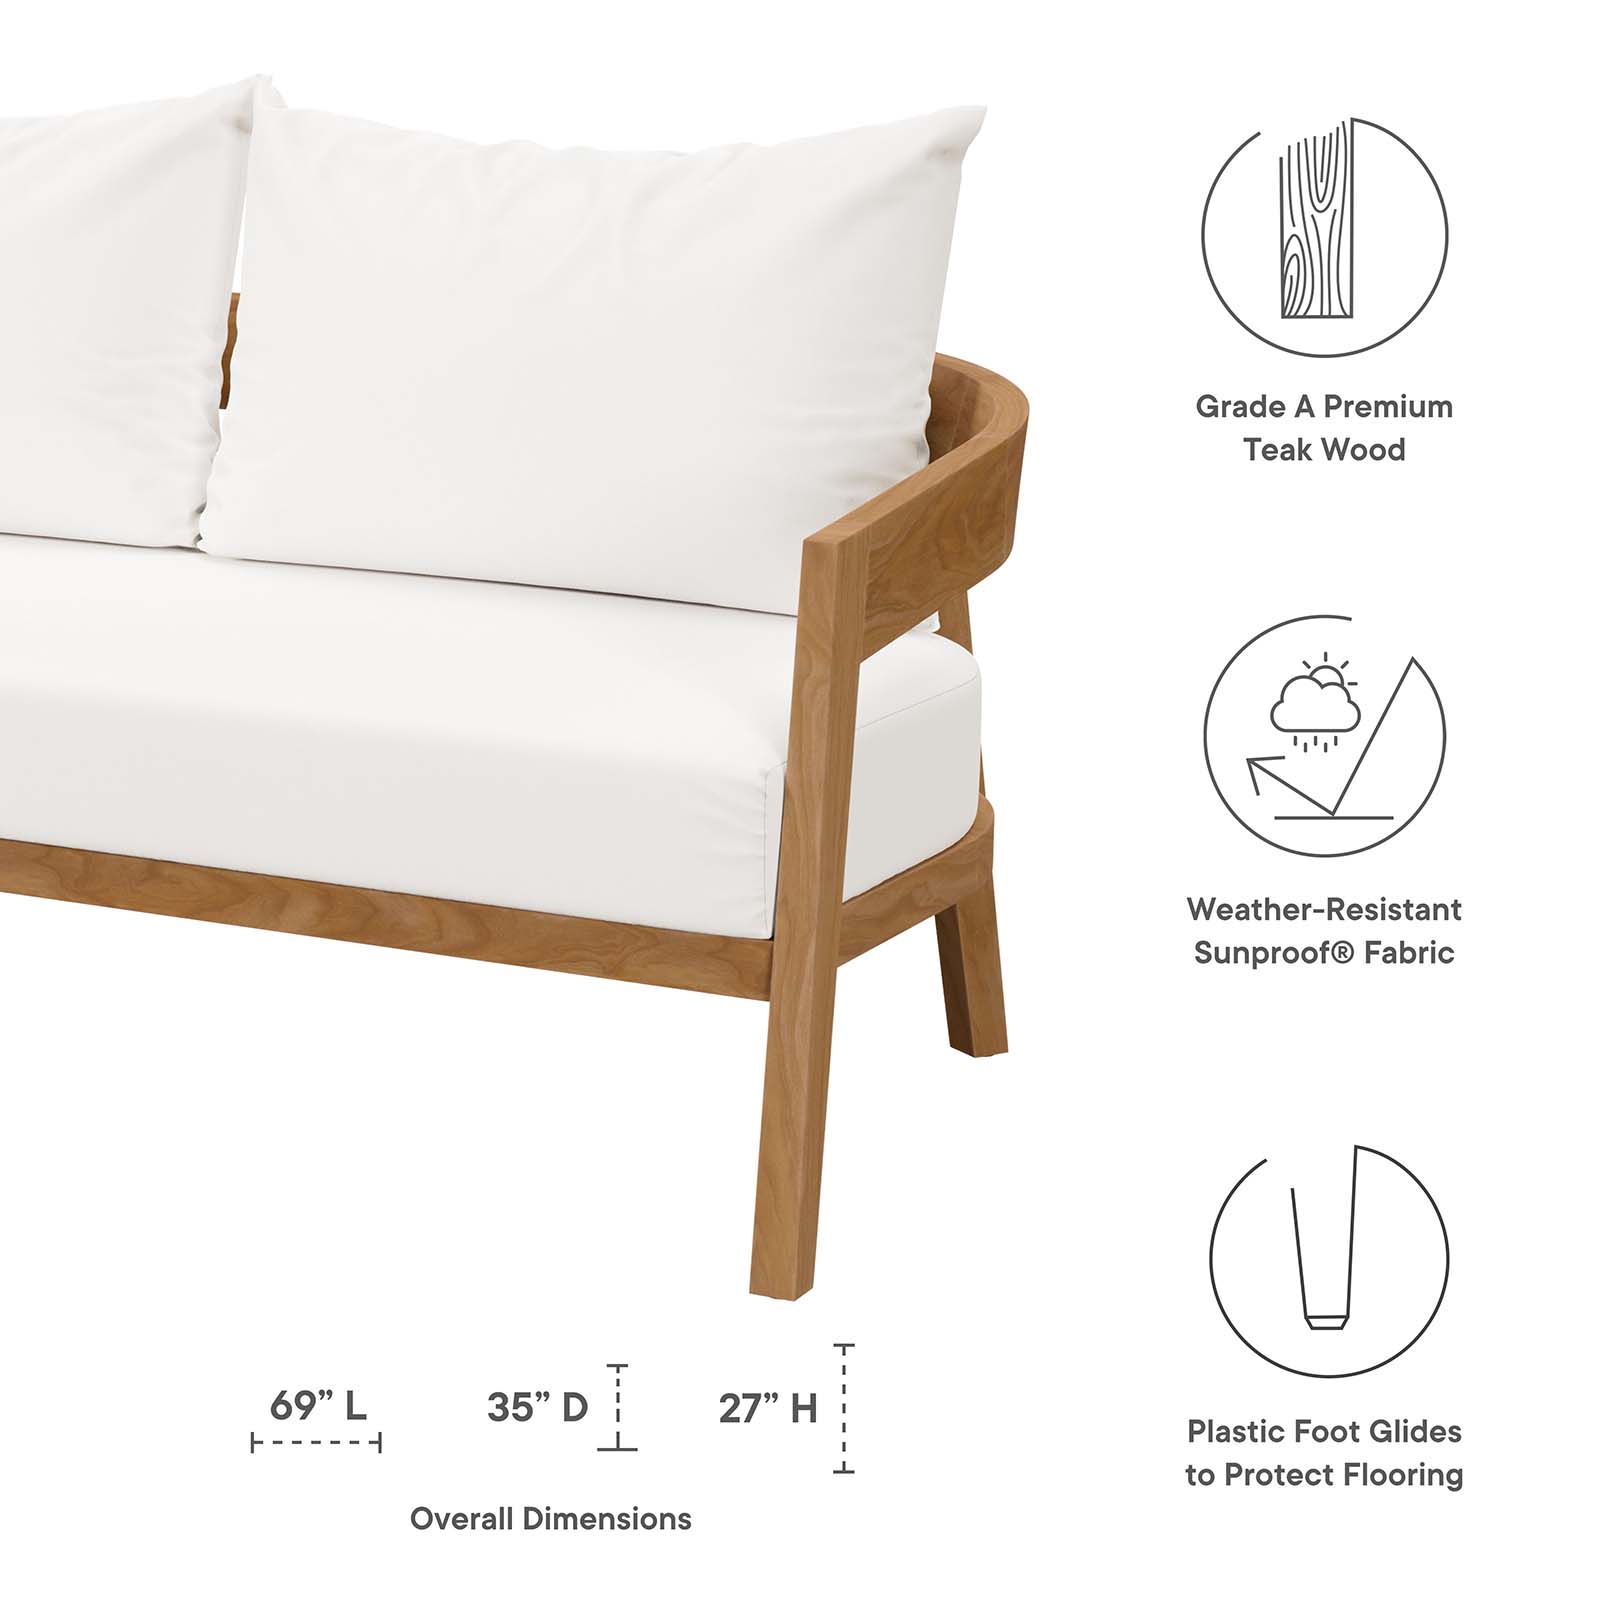 Lounge Sectional Sofa Chair Table Set, White Natural, Teak Wood, Fabric, Modern Contemporary, Outdoor Patio Balcony Cafe Bistro Garden Furniture Hotel Hospitality - image 3 of 10